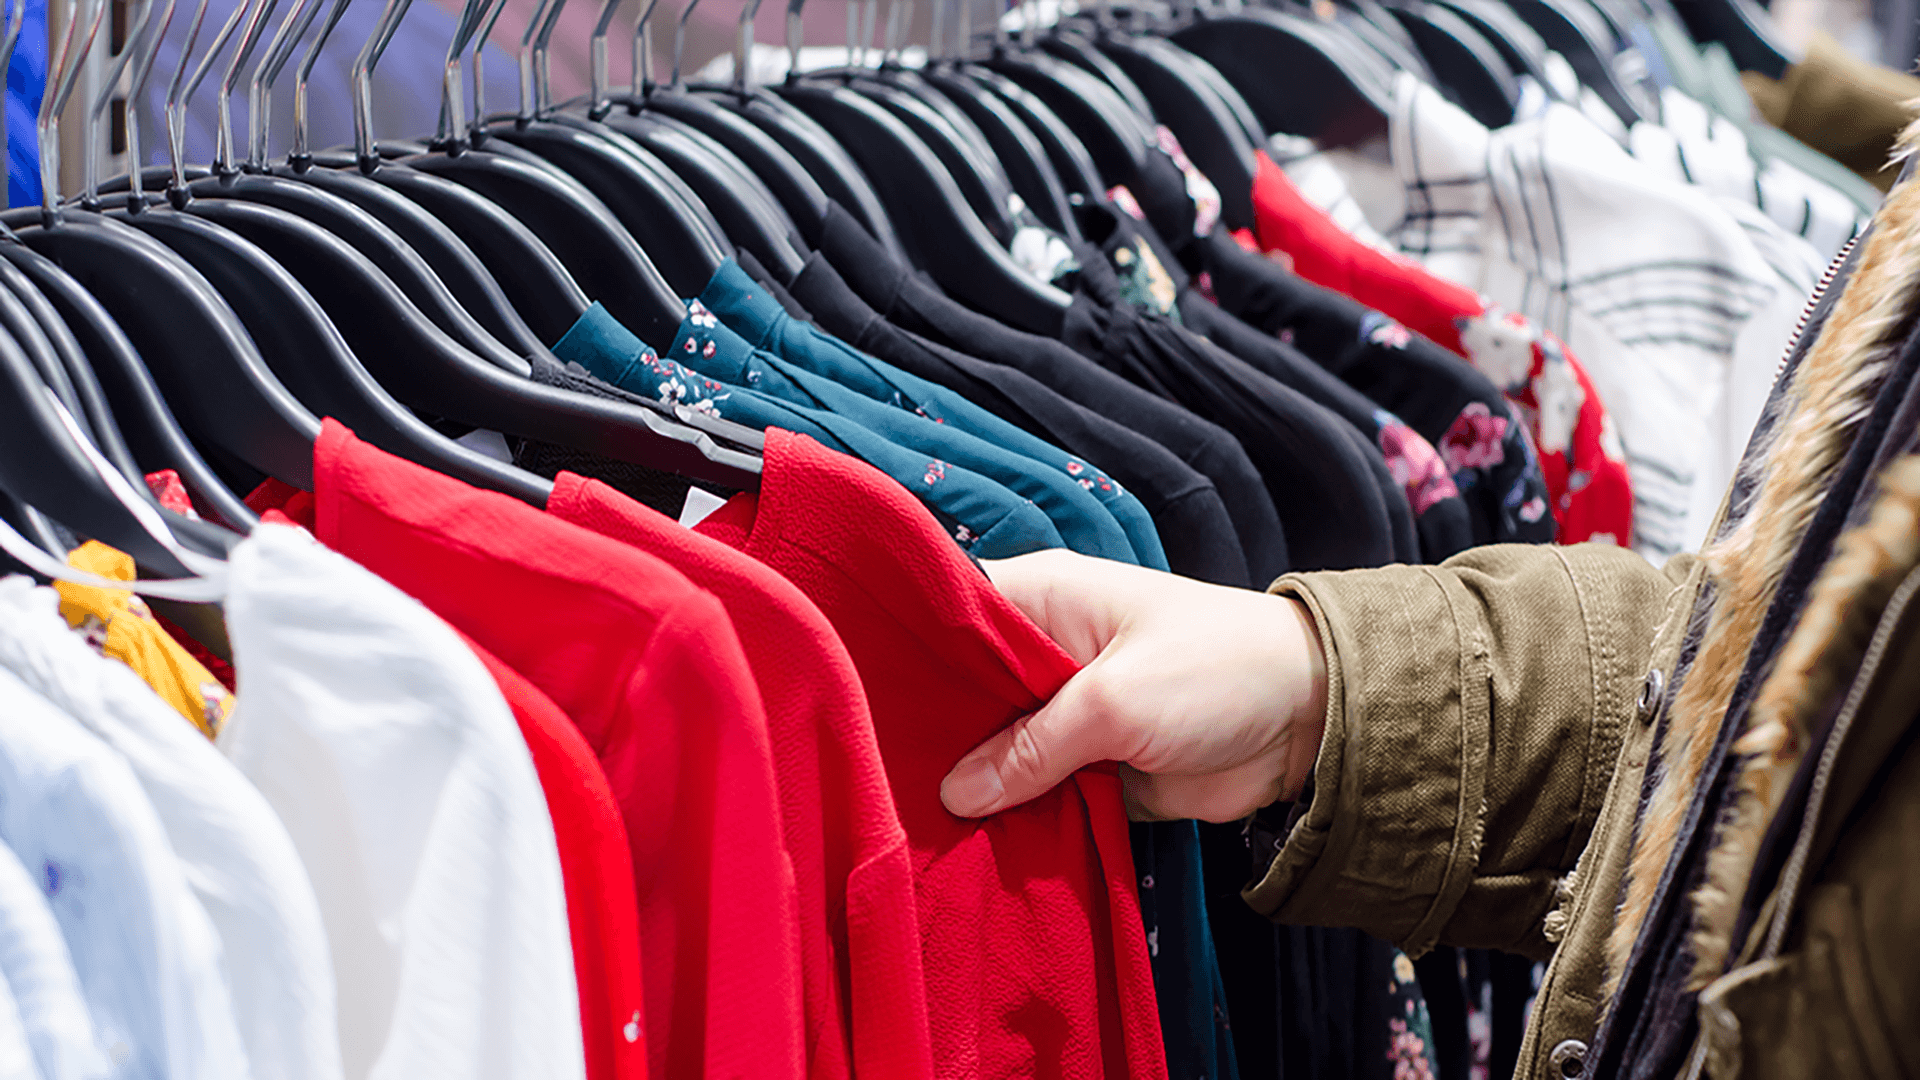 Annual thredUP report predicts future of secondhand shopping